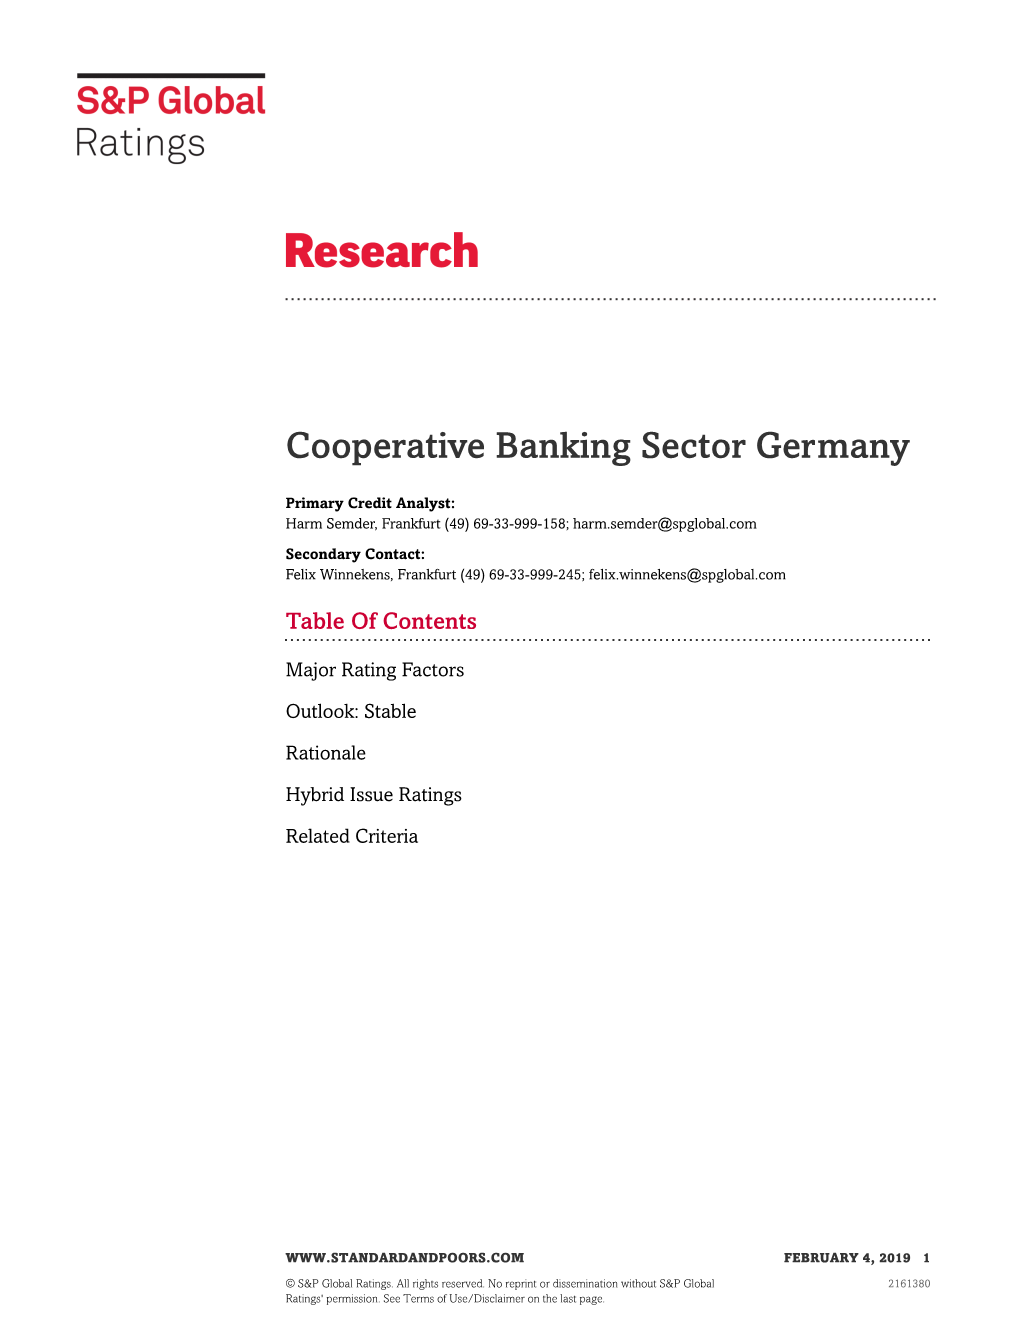 Cooperative Banking Sector Germany